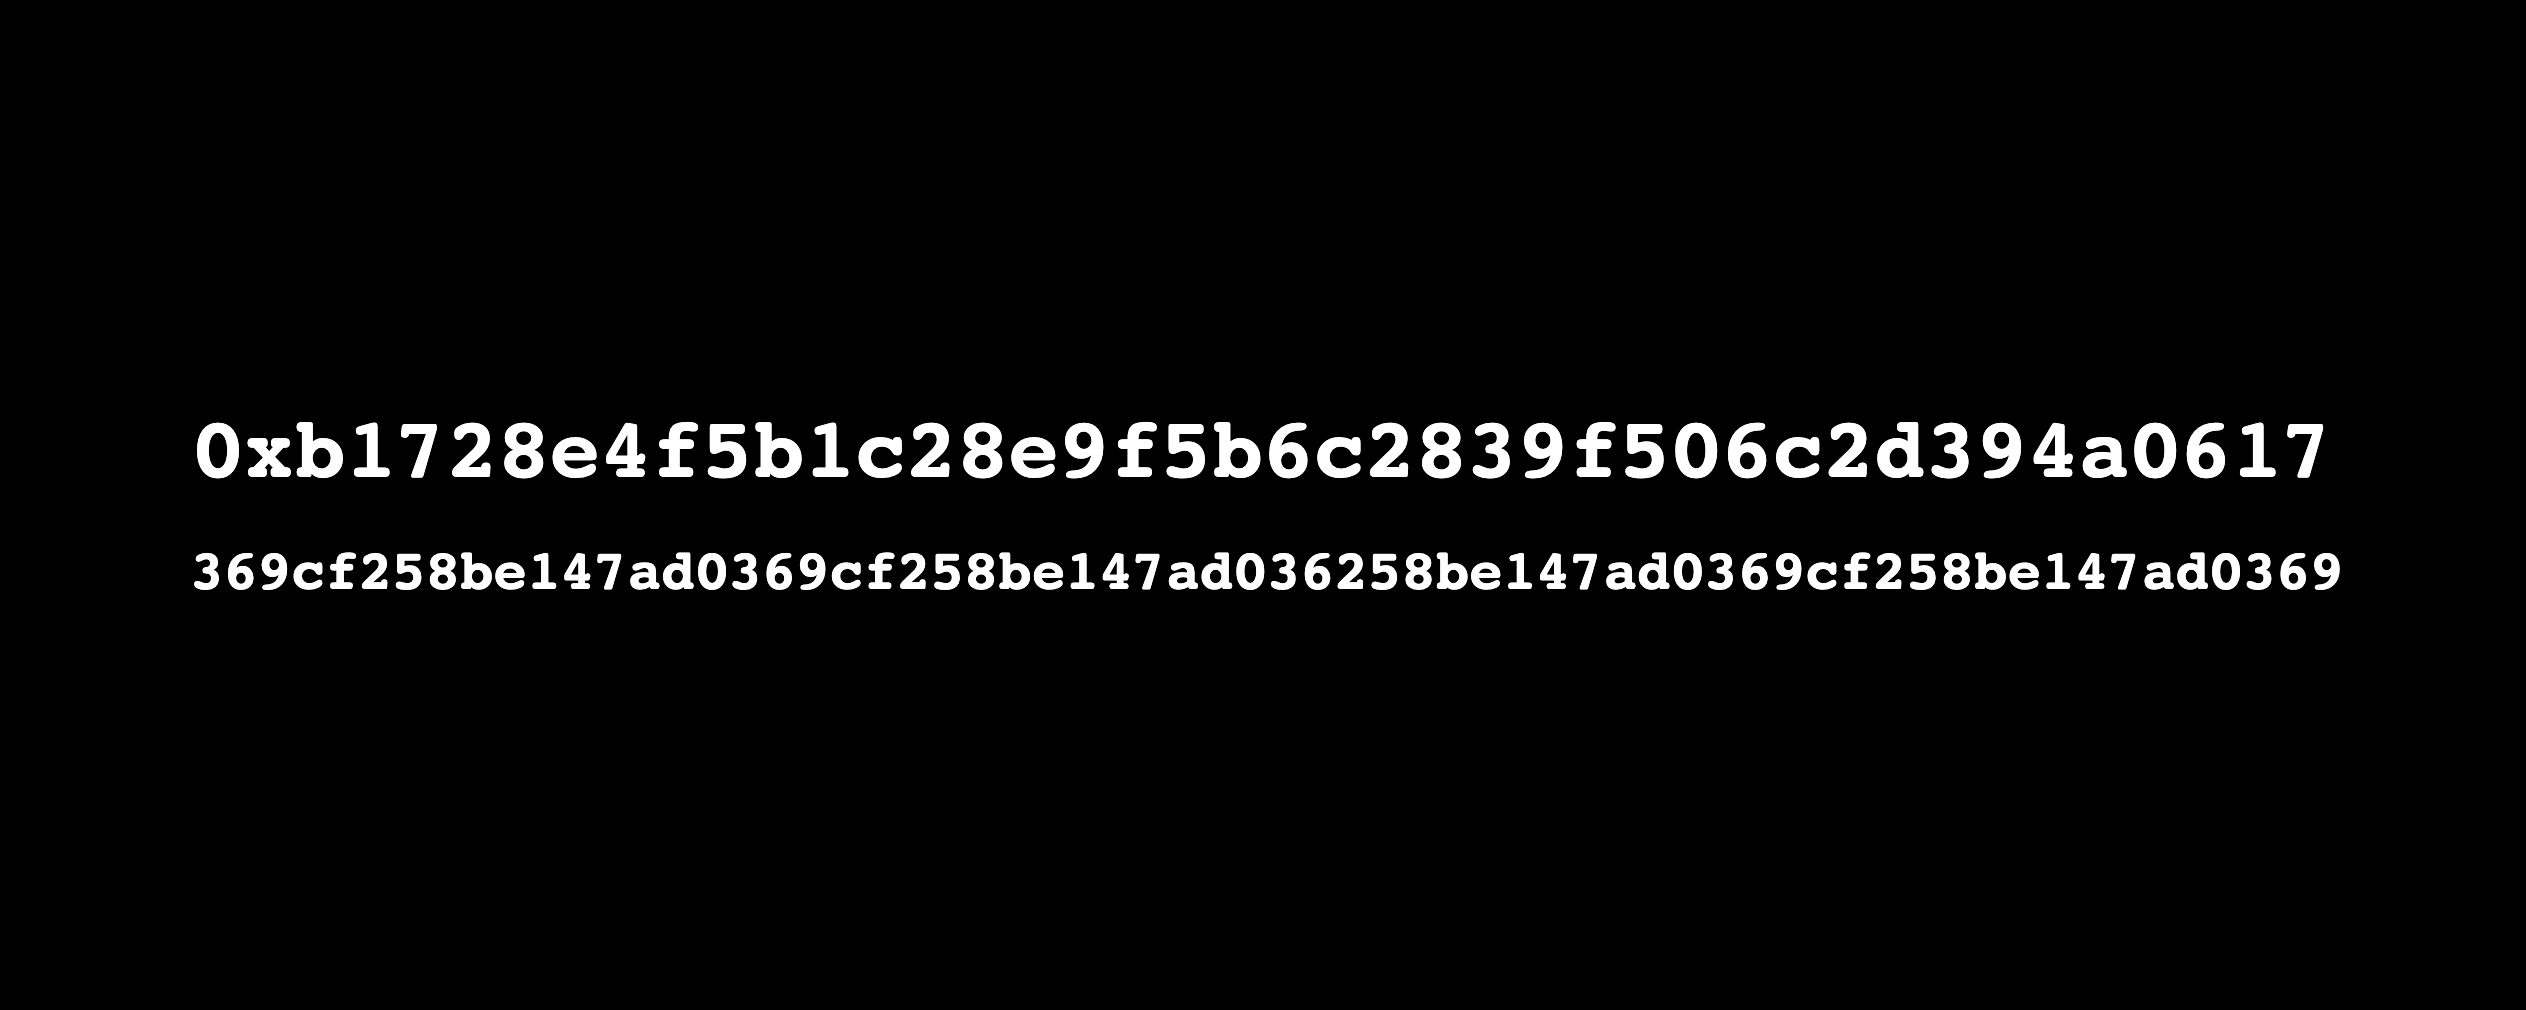 Two lines of randomized, white, hexadecimal characters centered on a black background. The first line is 40 characters long and reads: Oxb1728e4f5b1c28e95662839506c2d394a0617. The second line is 64 characters long and reads: 369c1258be147ad0369c1258be147ad036258be147ad0369cf258be147ad0369